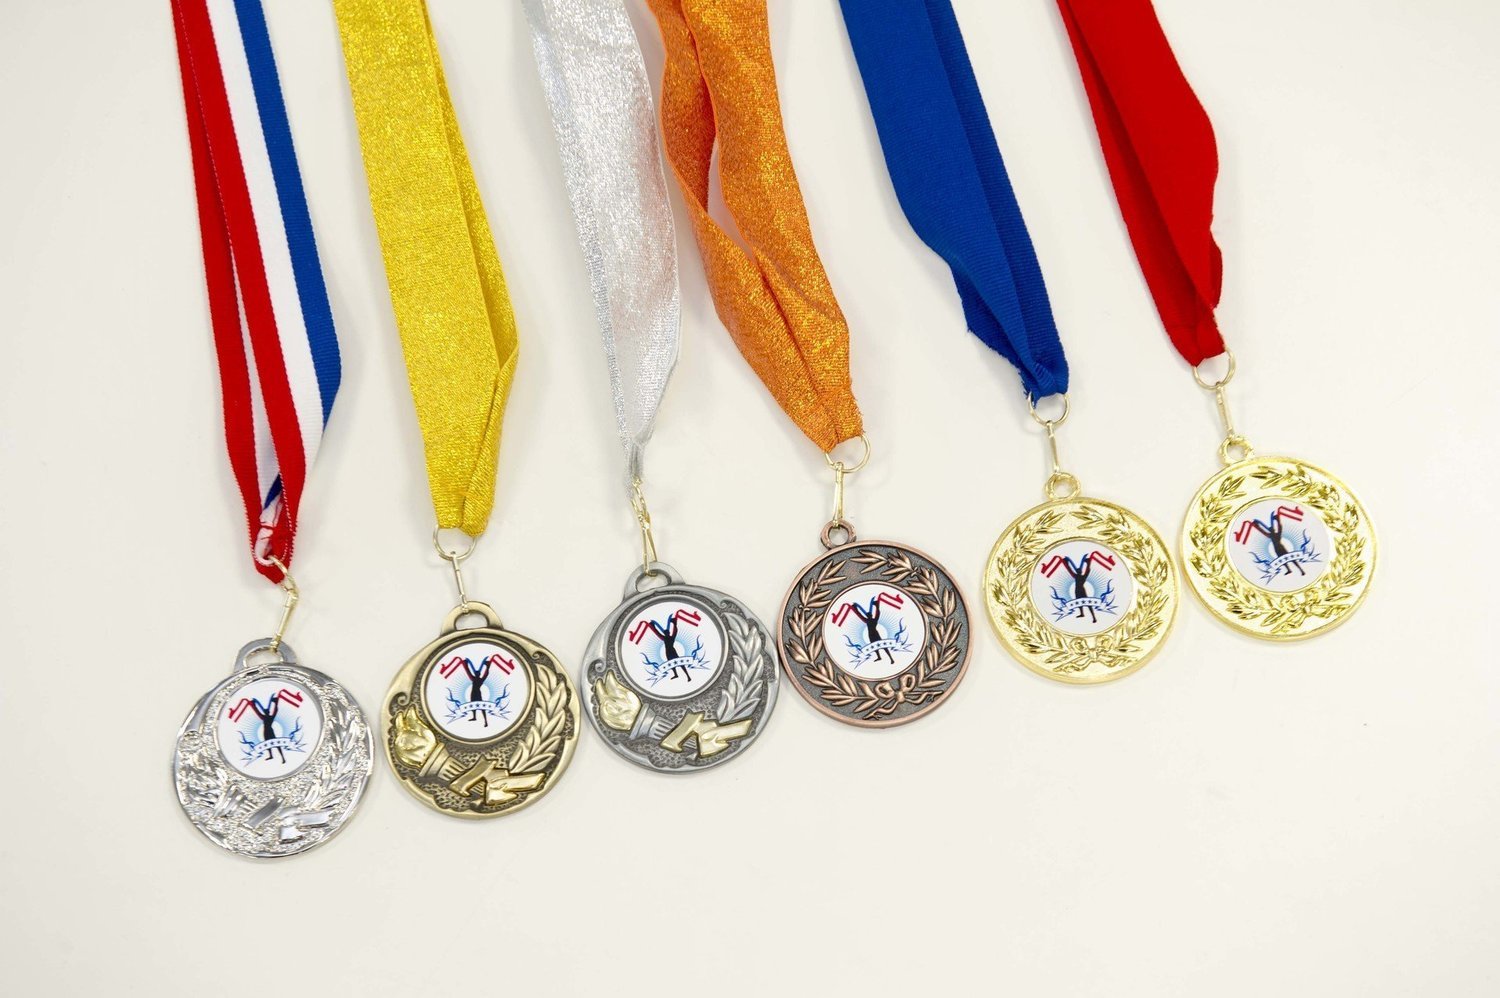 Boxing Awards Medals